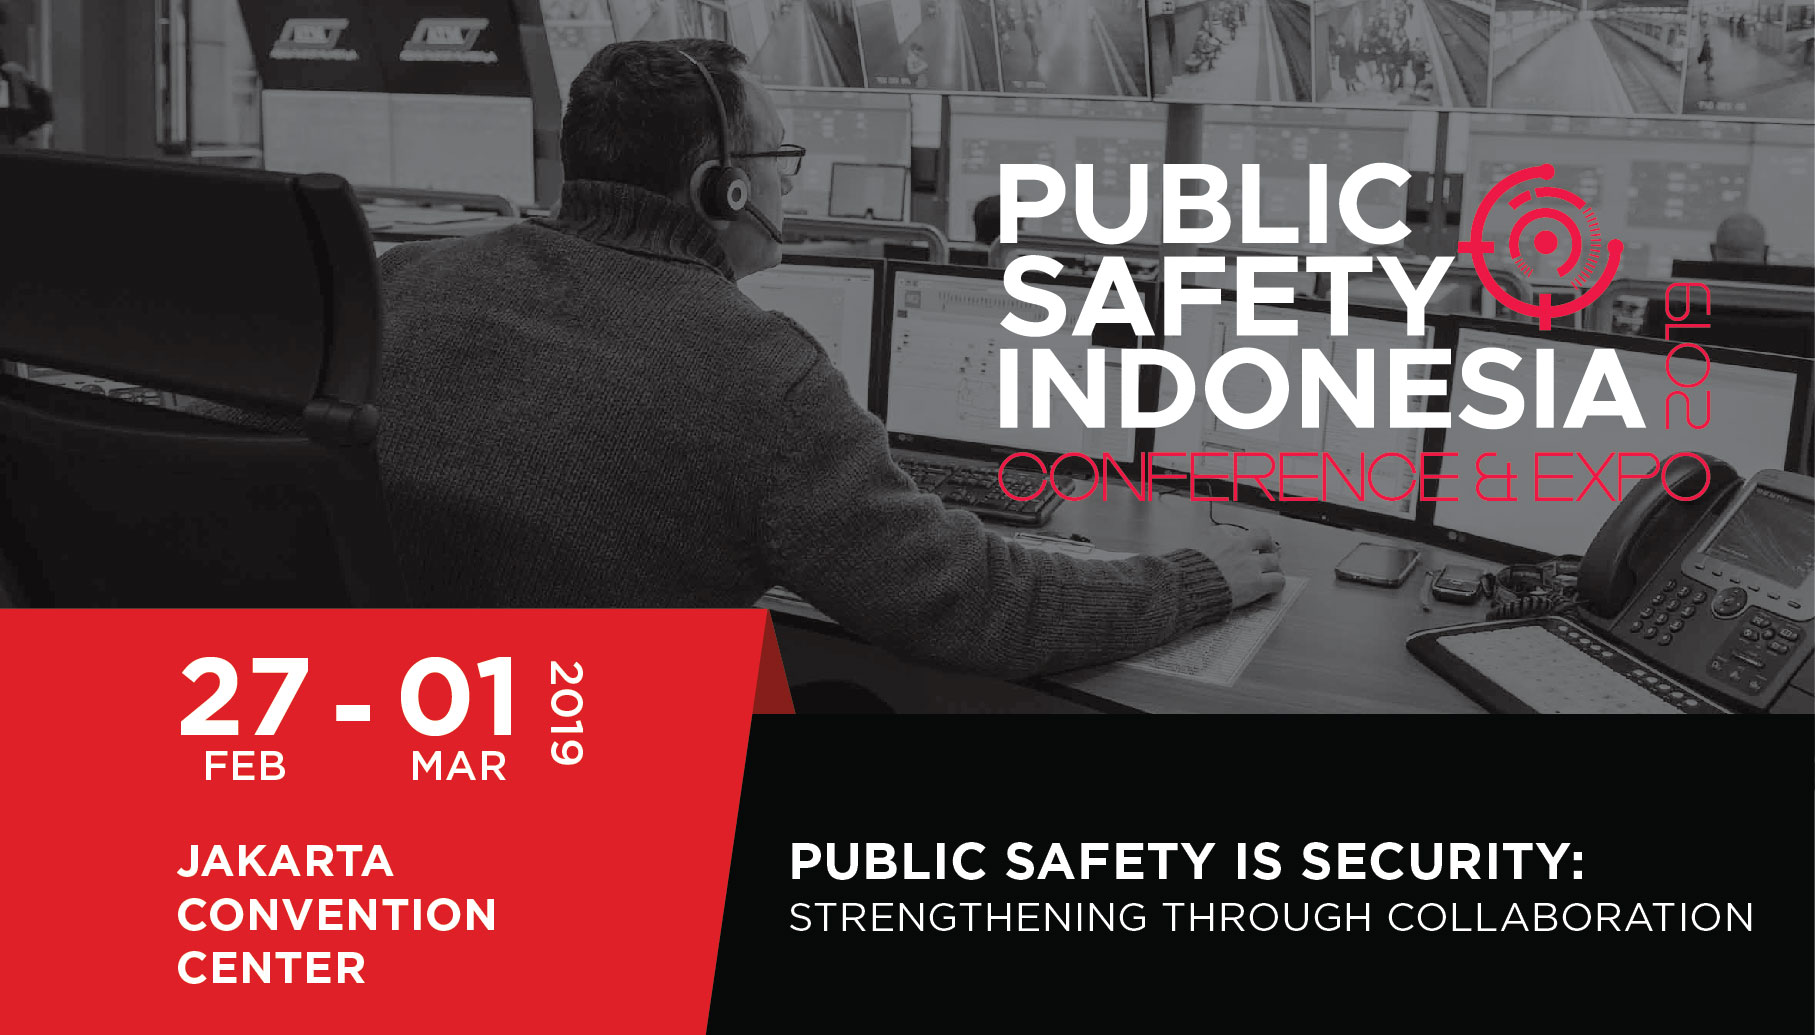 Public Safety Indonesia Conference & Expo 2019, Central Jakarta, Jakarta, Indonesia